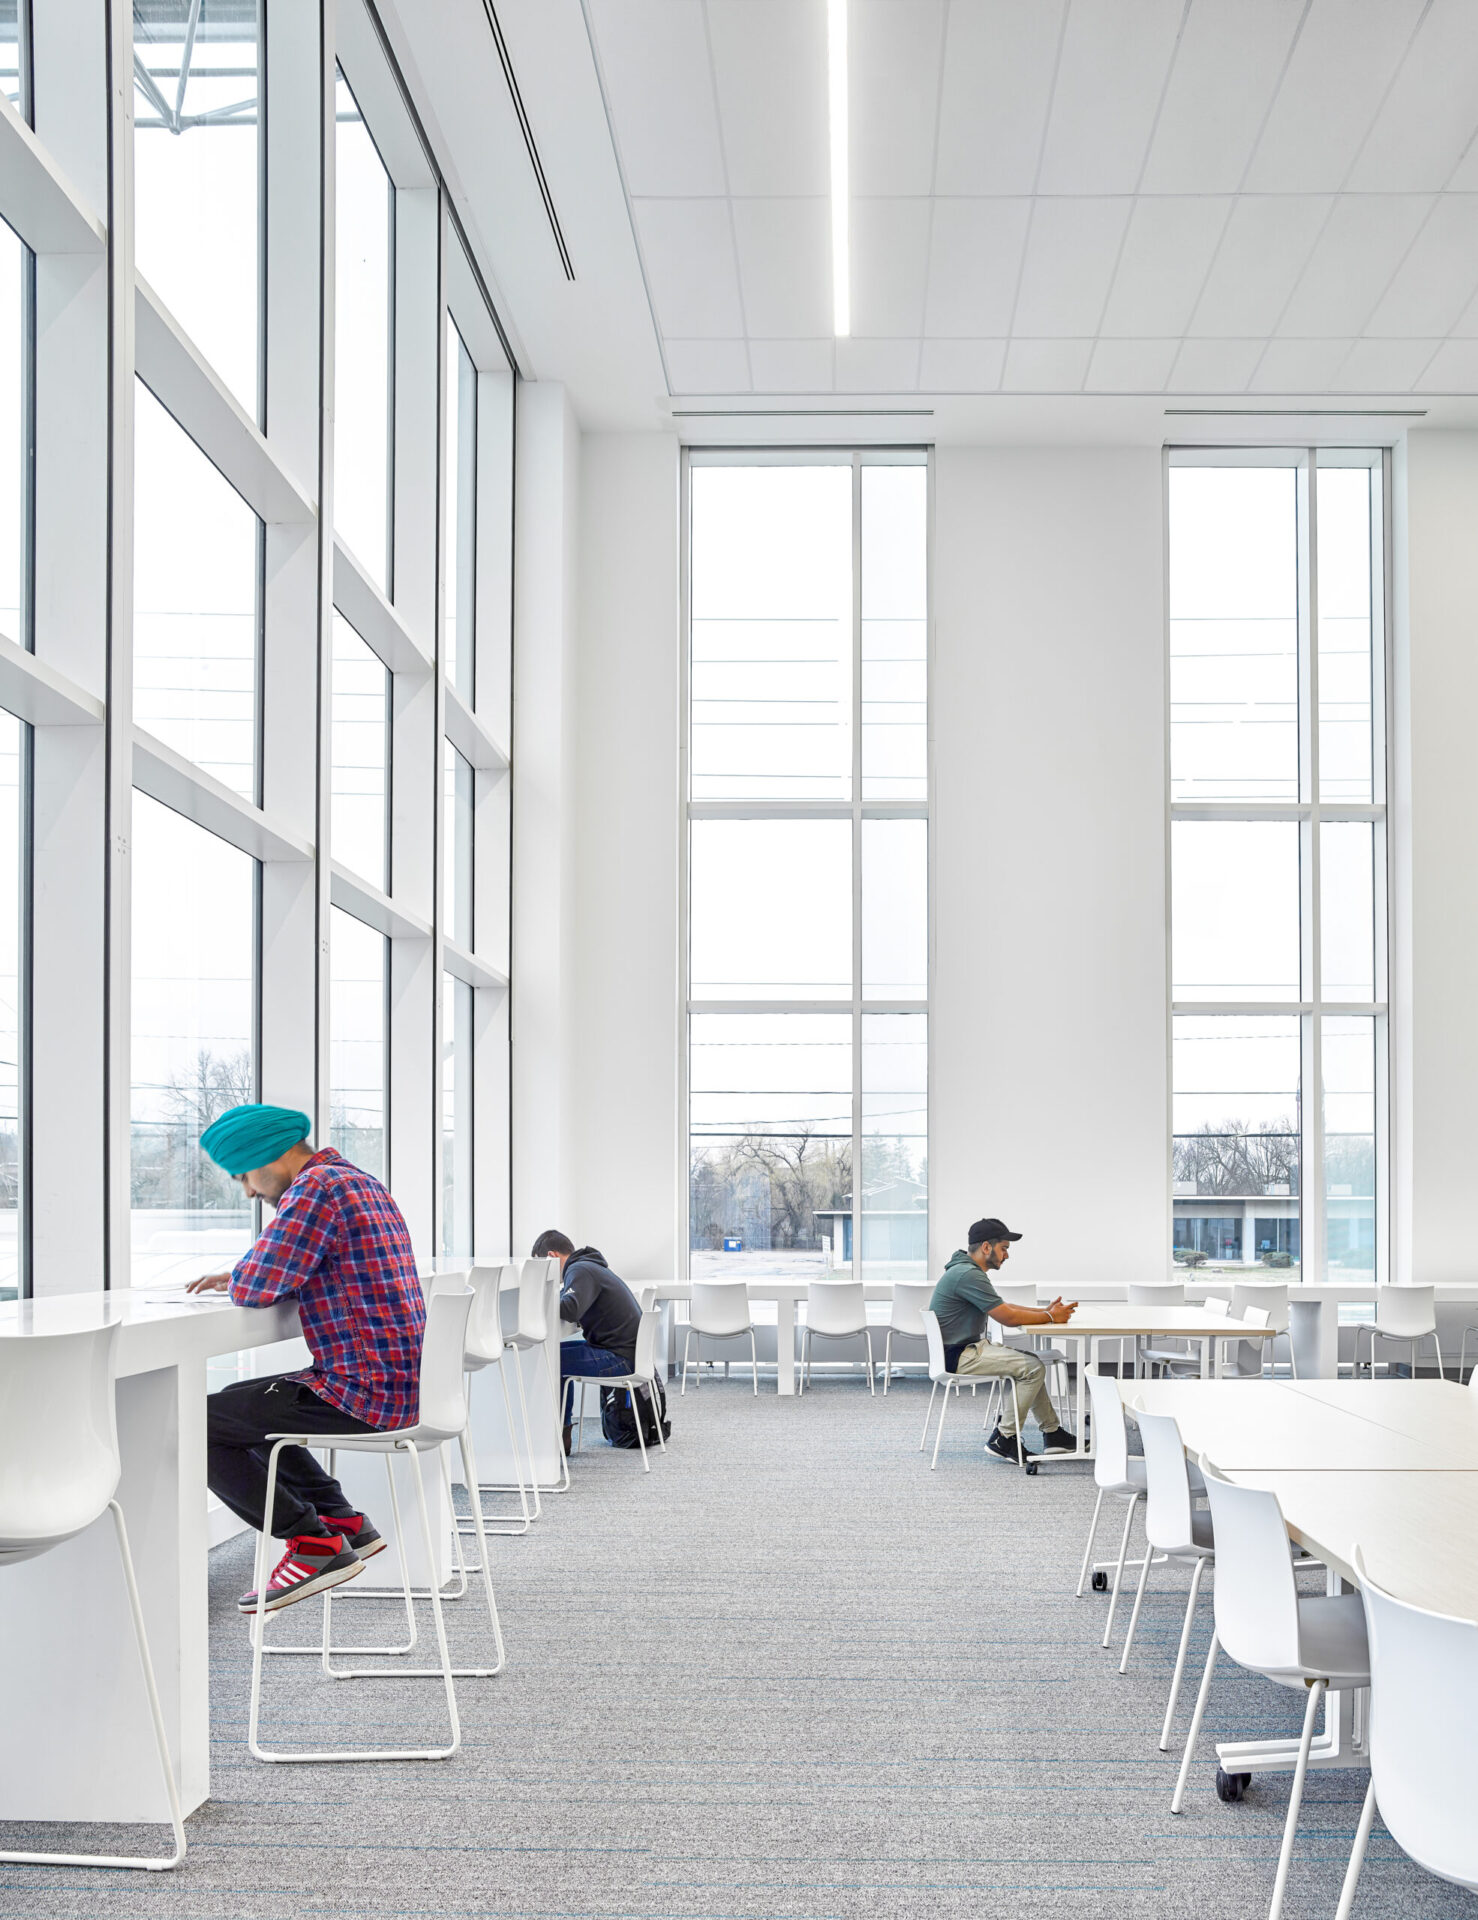 A group of people studying at tables in an architecturally designed library building.